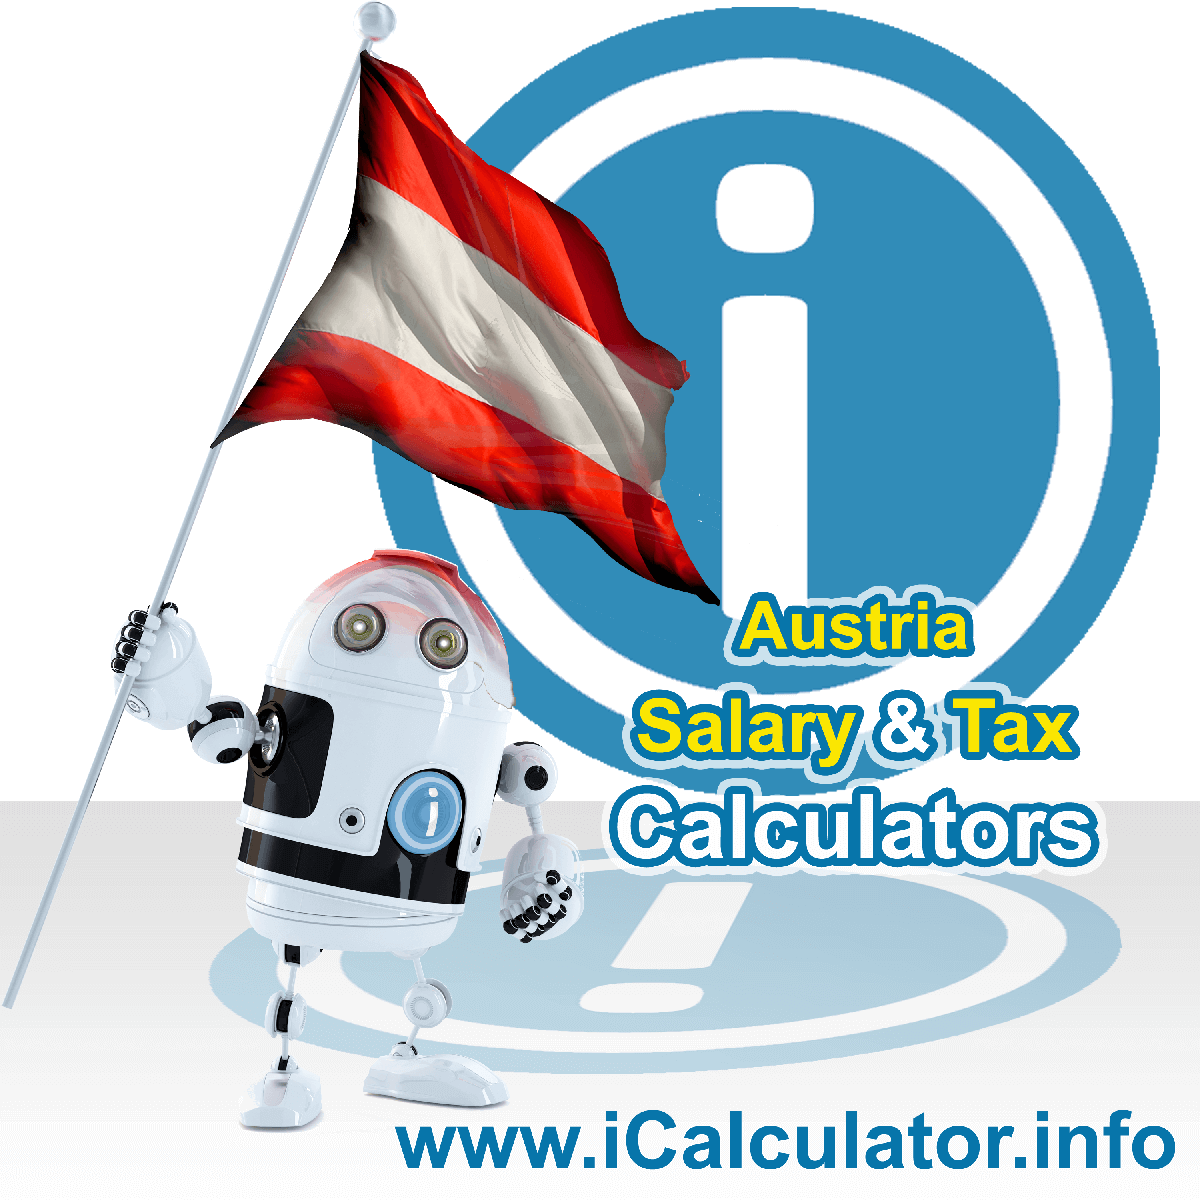 Austria Tax Calculator. This image shows the Austria flag and information relating to the tax formula for the Austria Salary Calculator